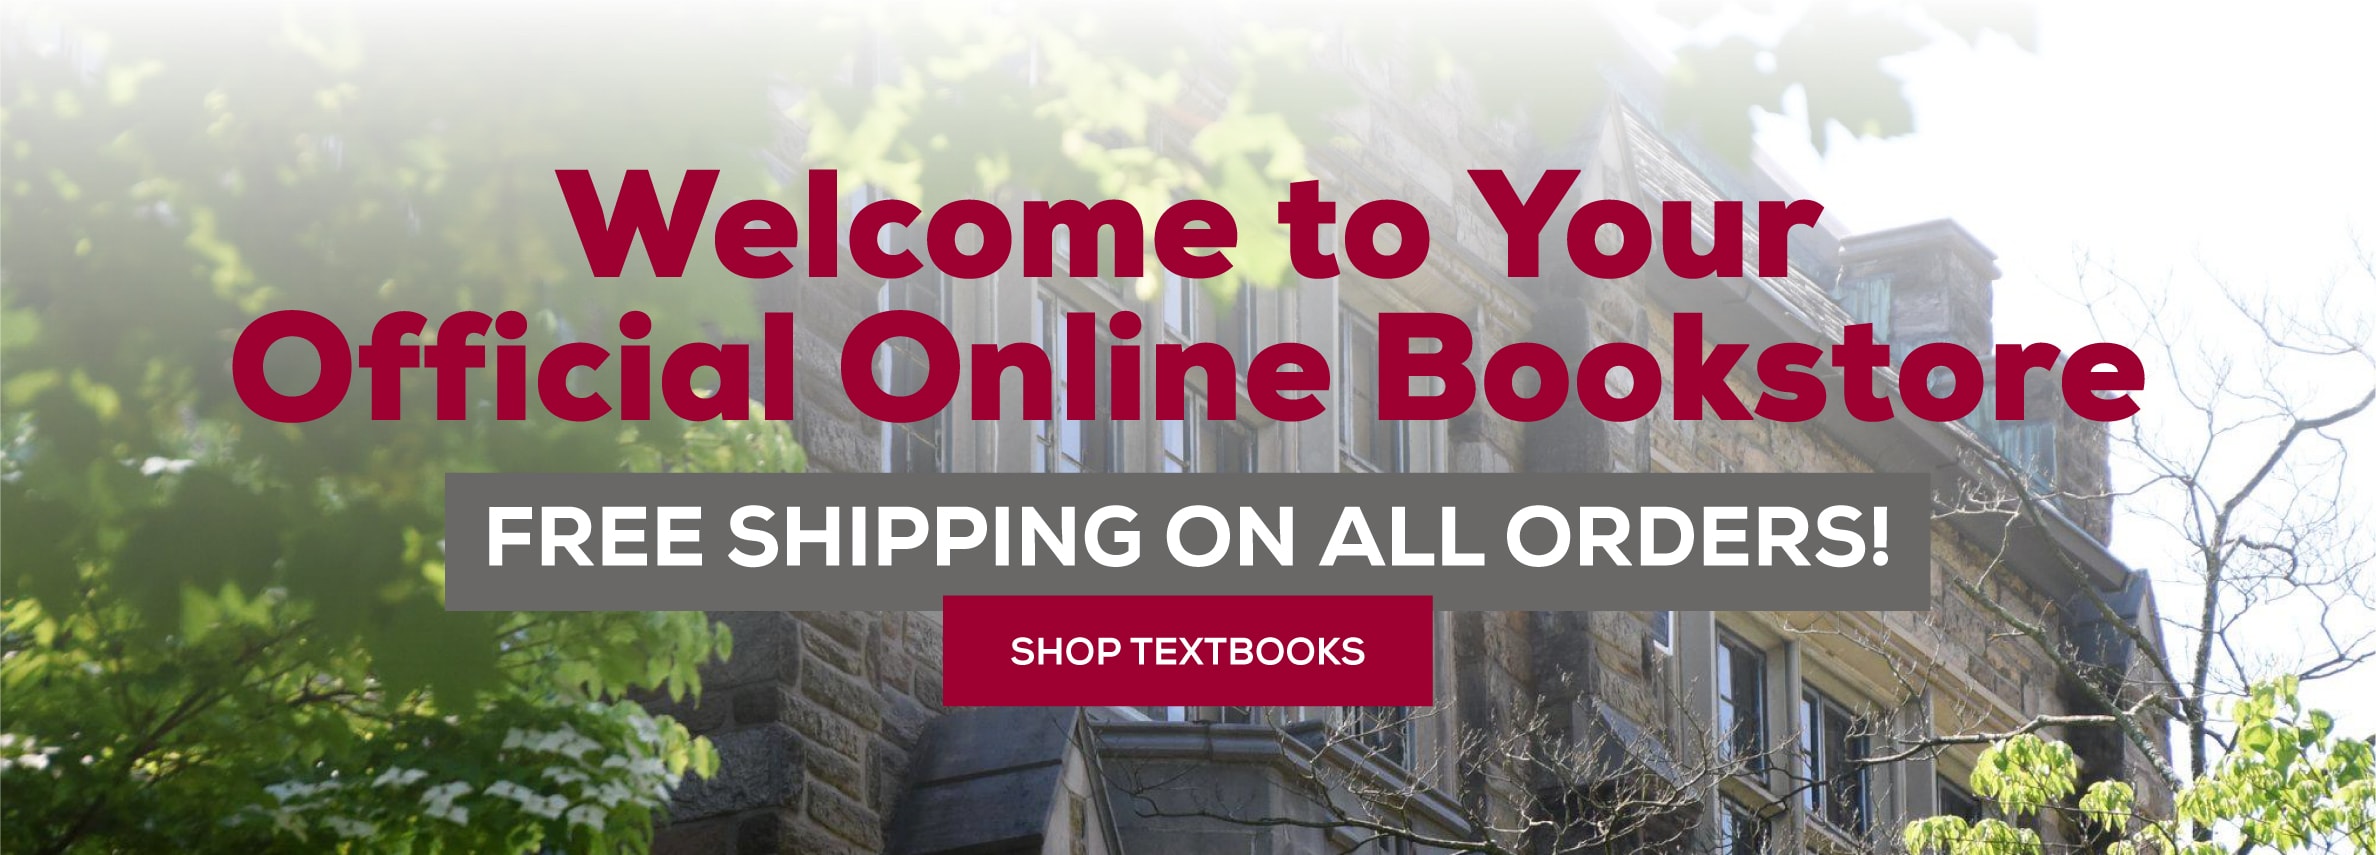 Welcome to your online bookstore. Free shipping on all orders. Shop Textbooks.